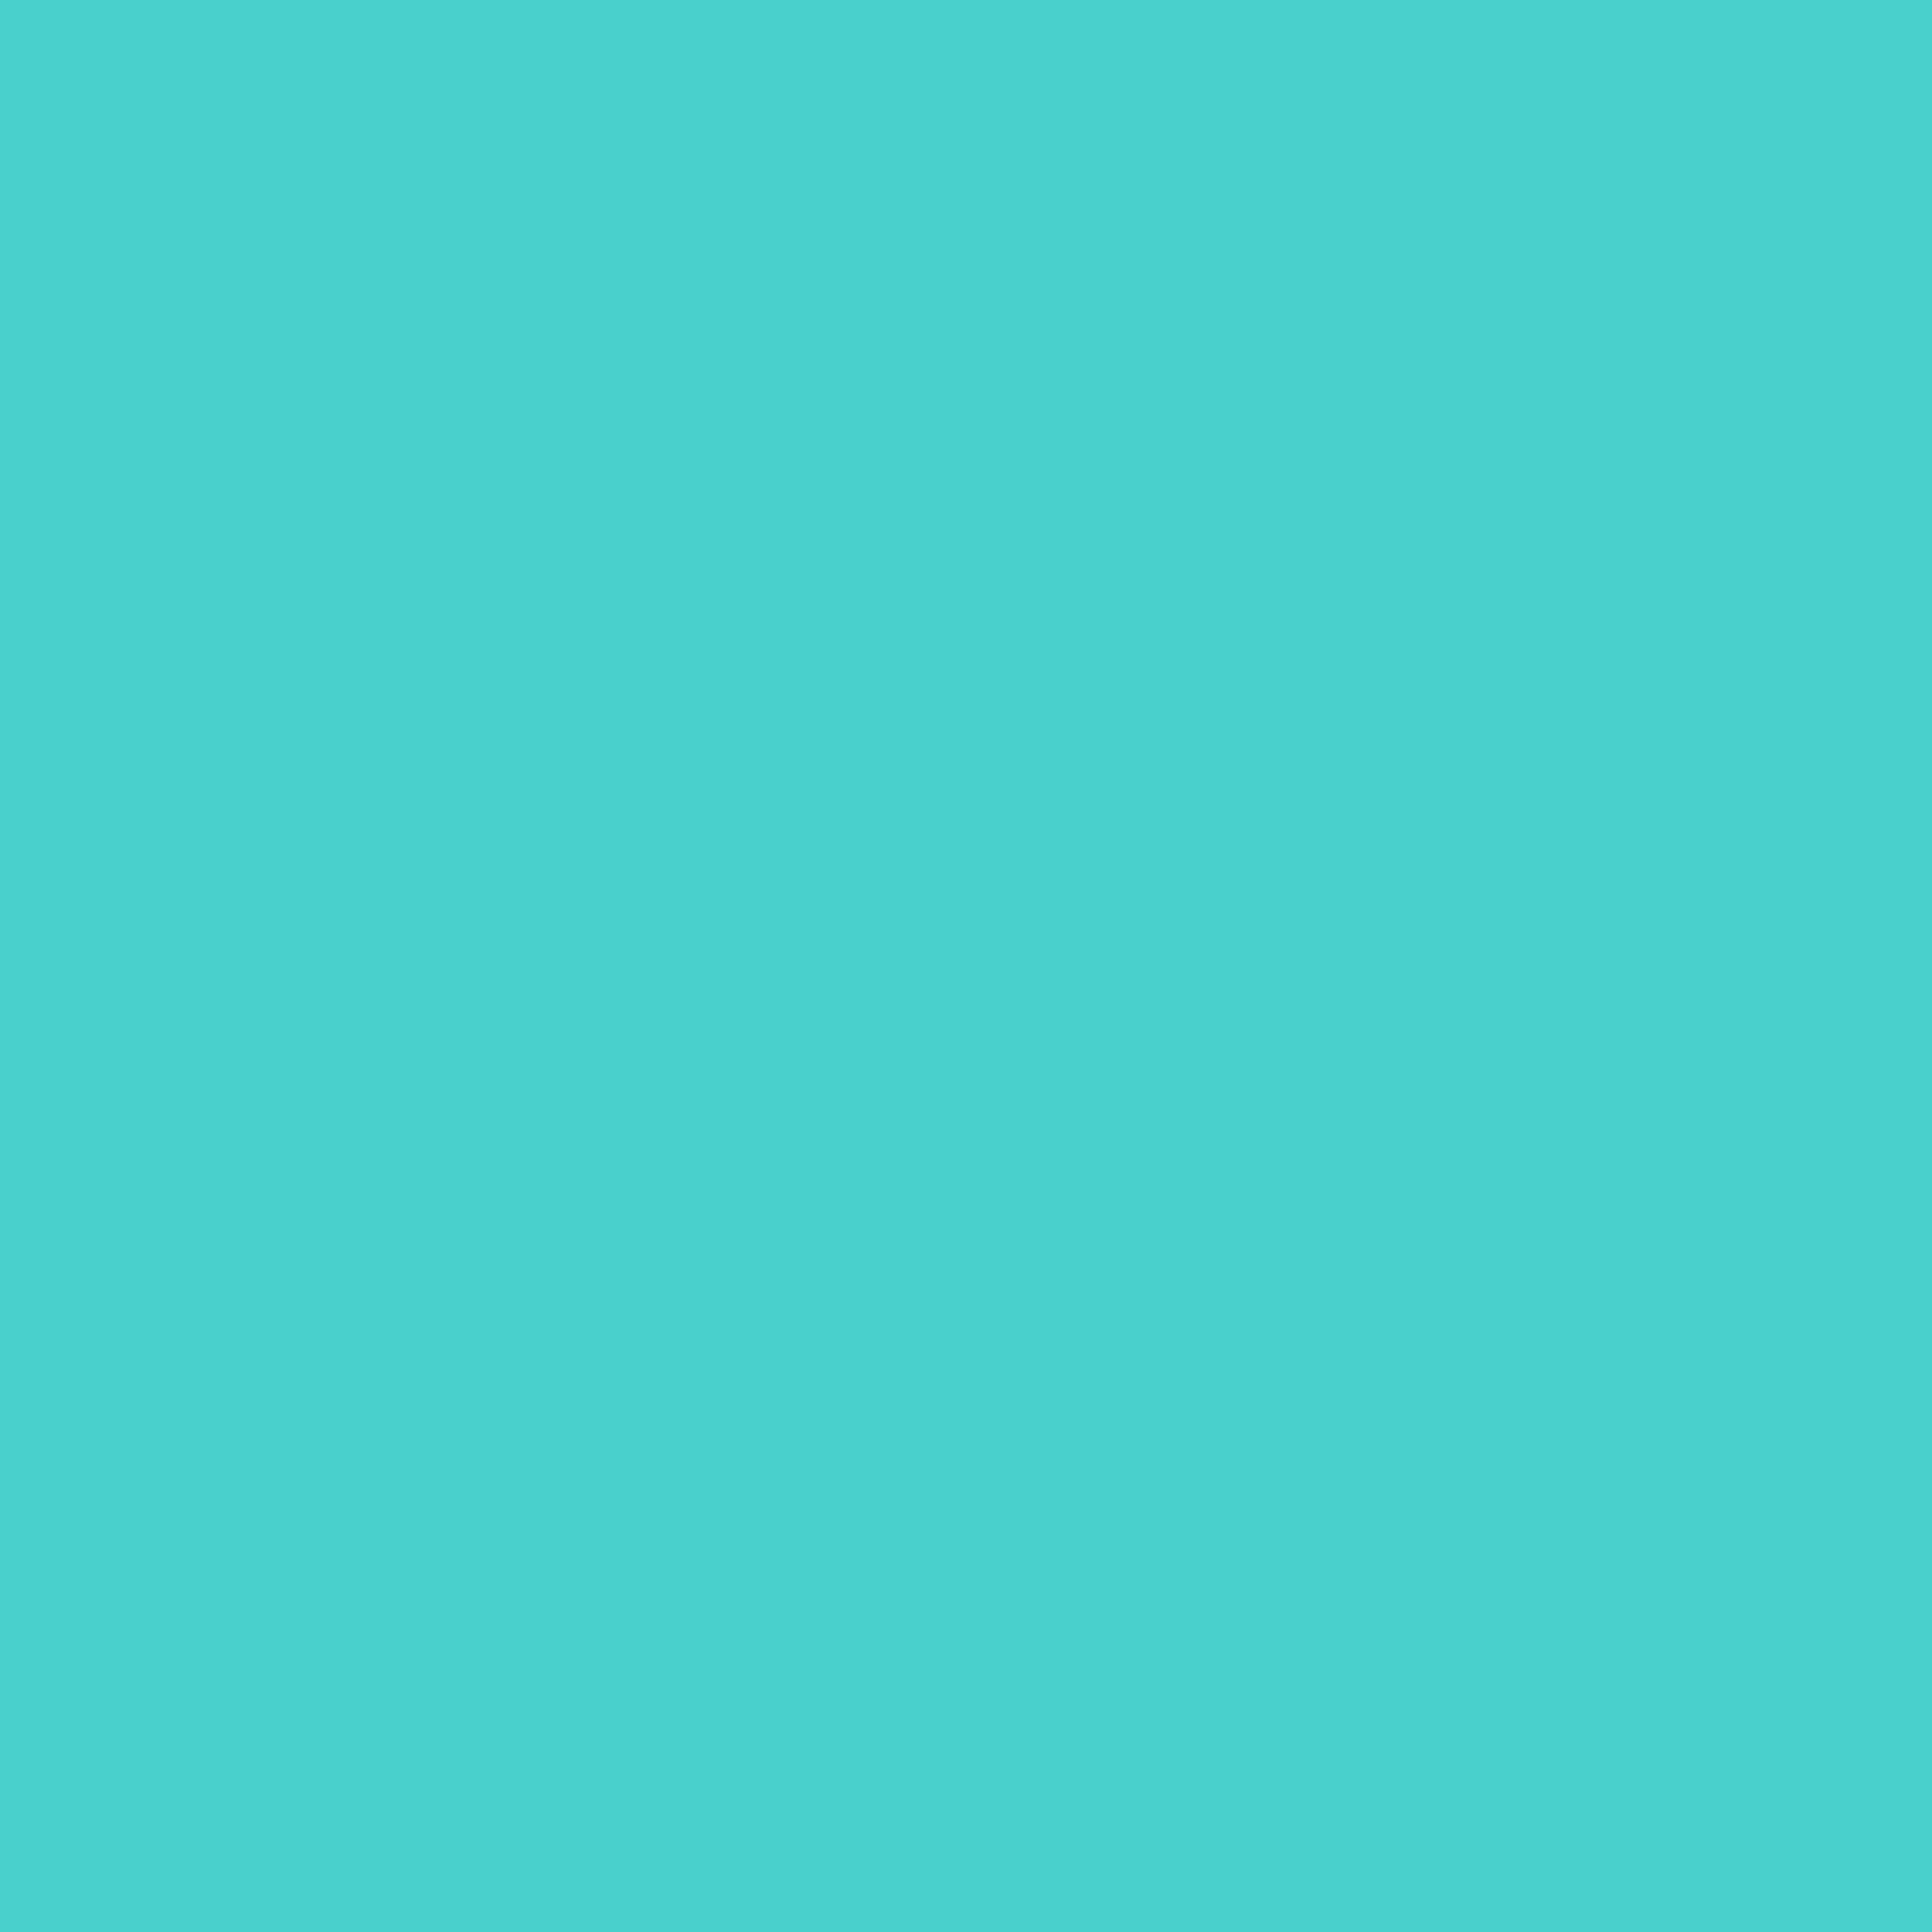 2732x2732 Medium Turquoise Solid Color Background